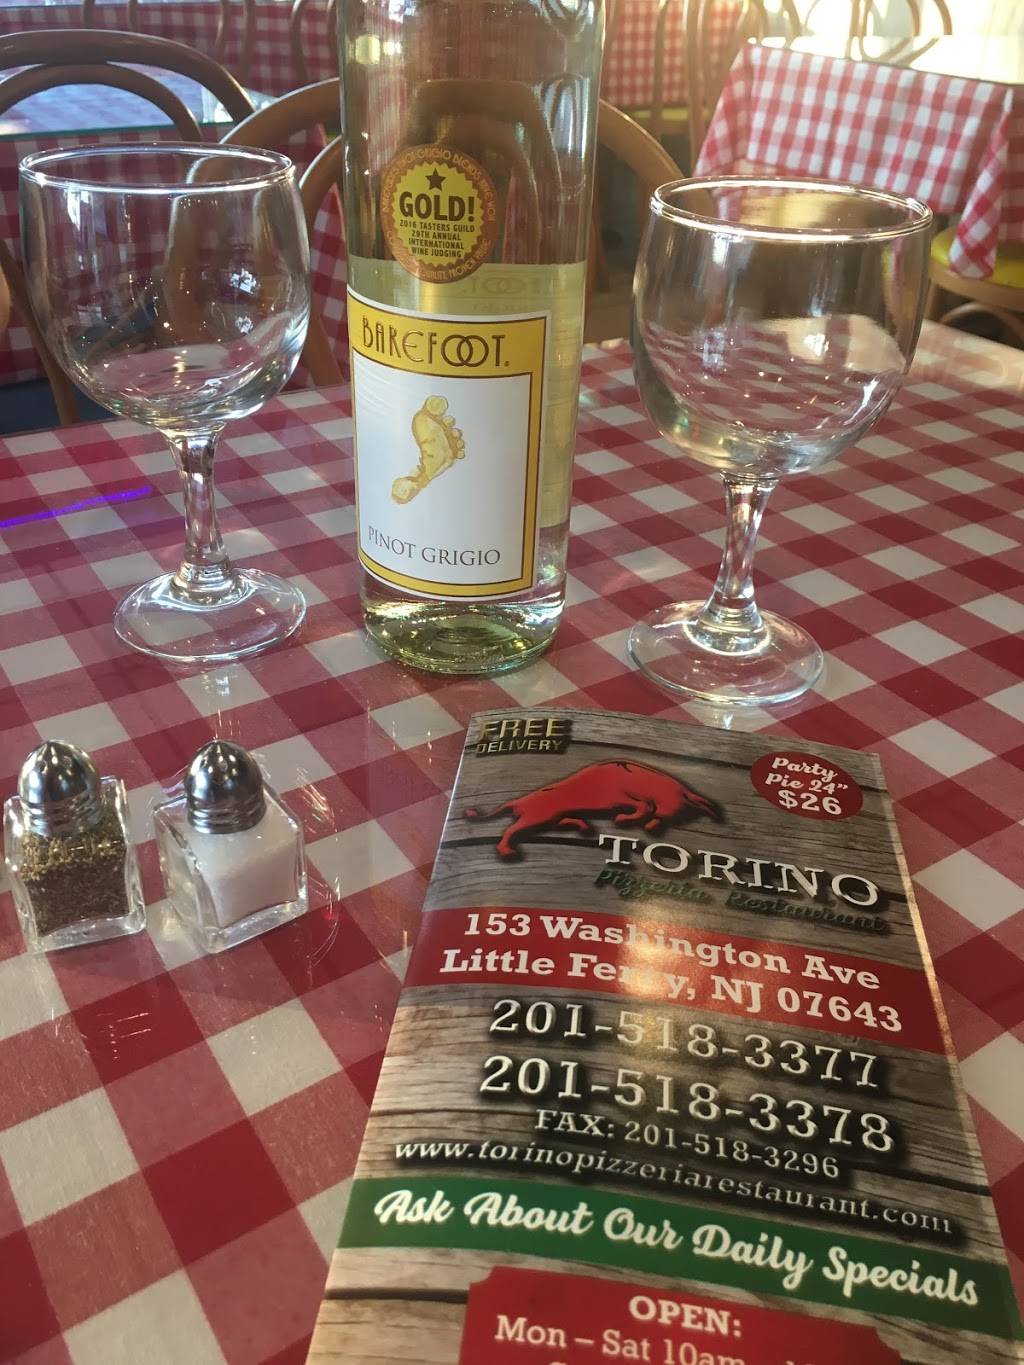 Torino Pizzeria Restaurant | meal delivery | 153 Washington Ave, Little Ferry, NJ 07643, USA | 2015183377 OR +1 201-518-3377